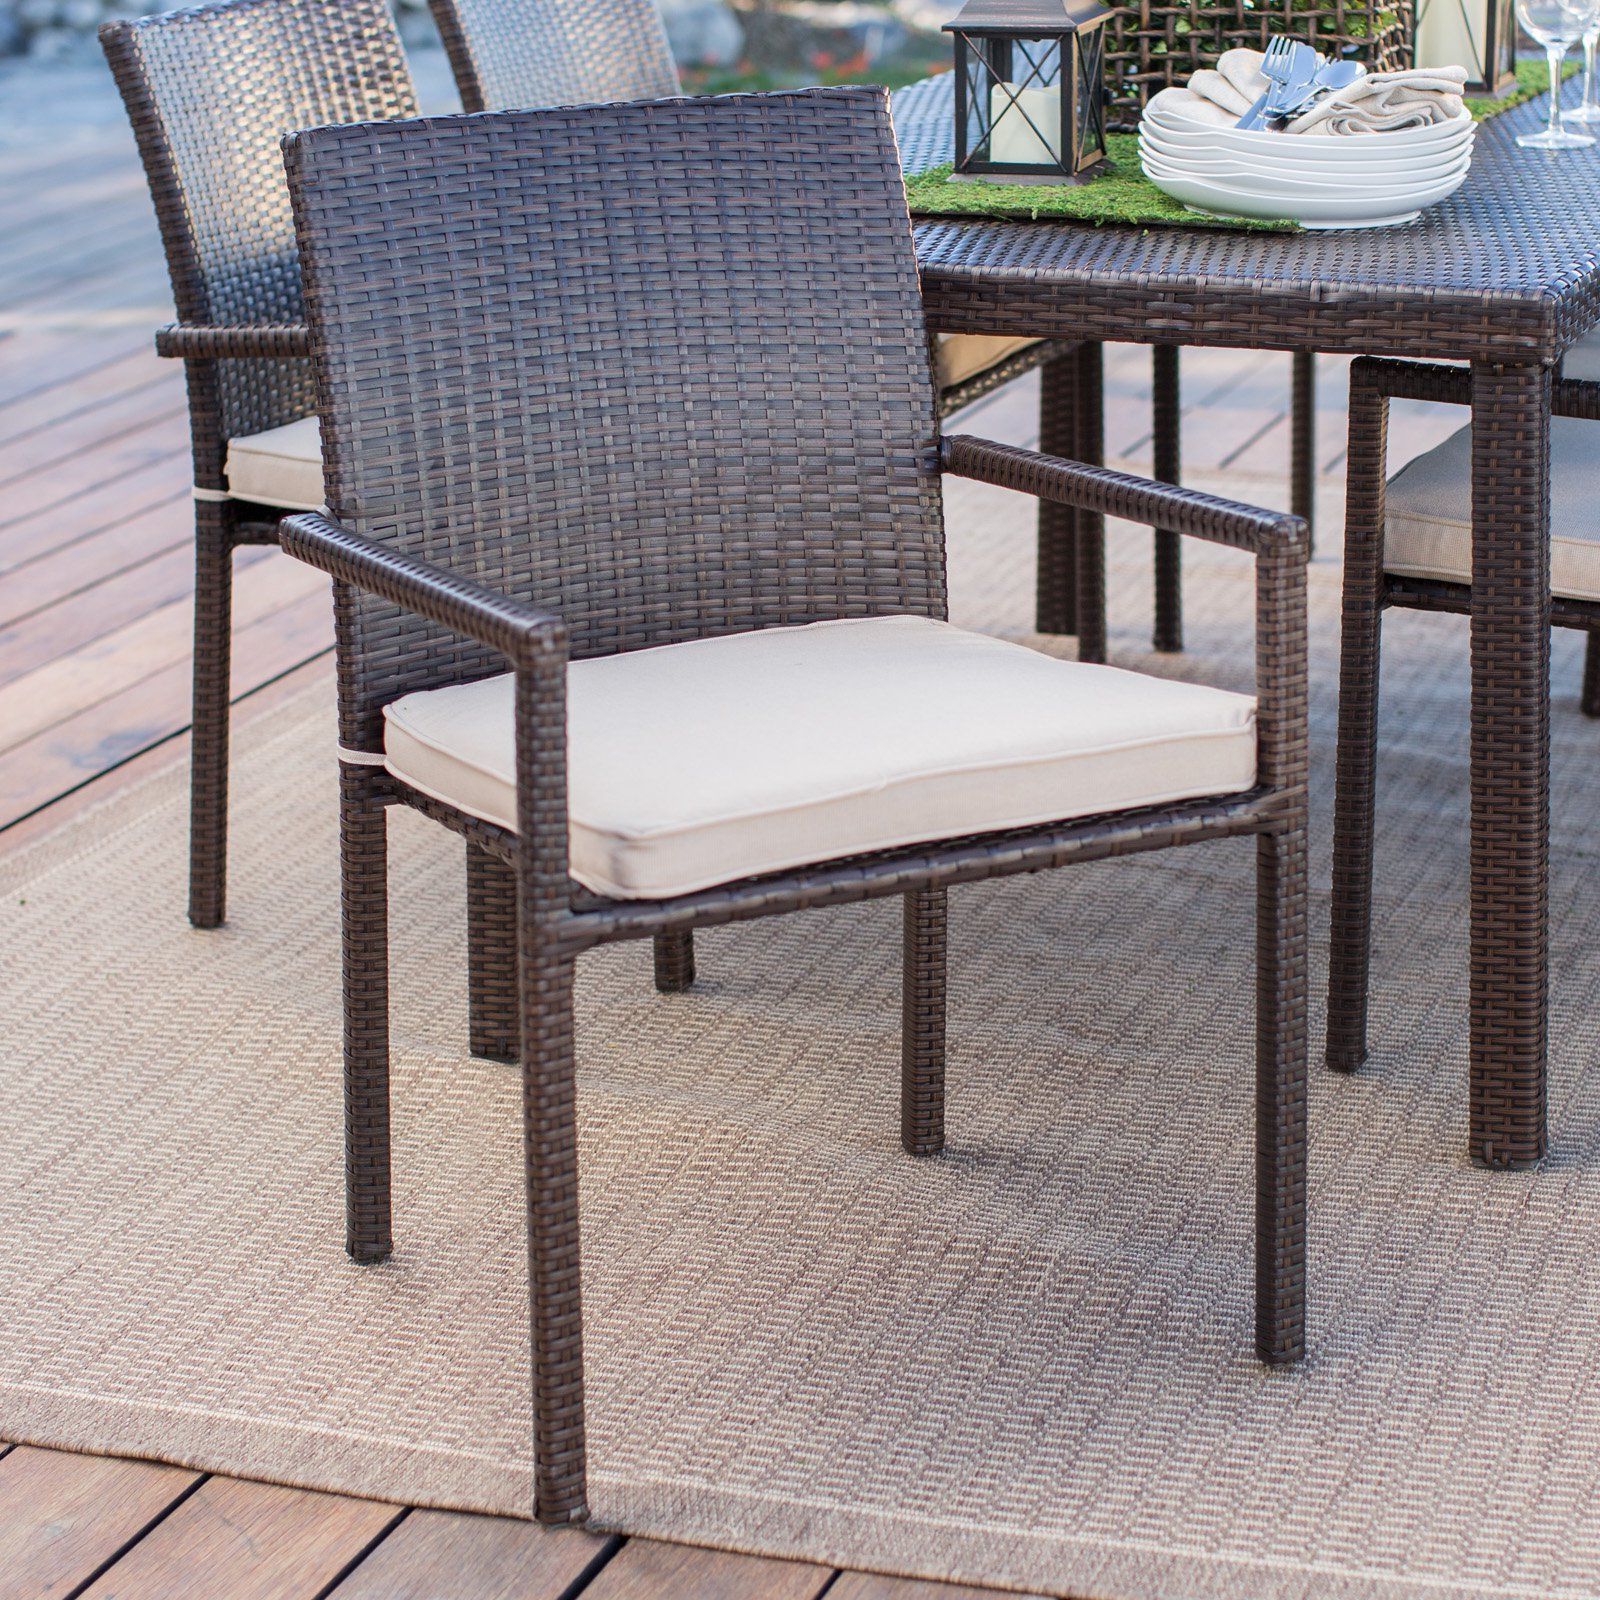 Famous Coral Coast South Isle All Weather Wicker Dark Brown Patio Dining Arm With Natural All Weather Outdoor Seating Patio Sets (View 7 of 15)